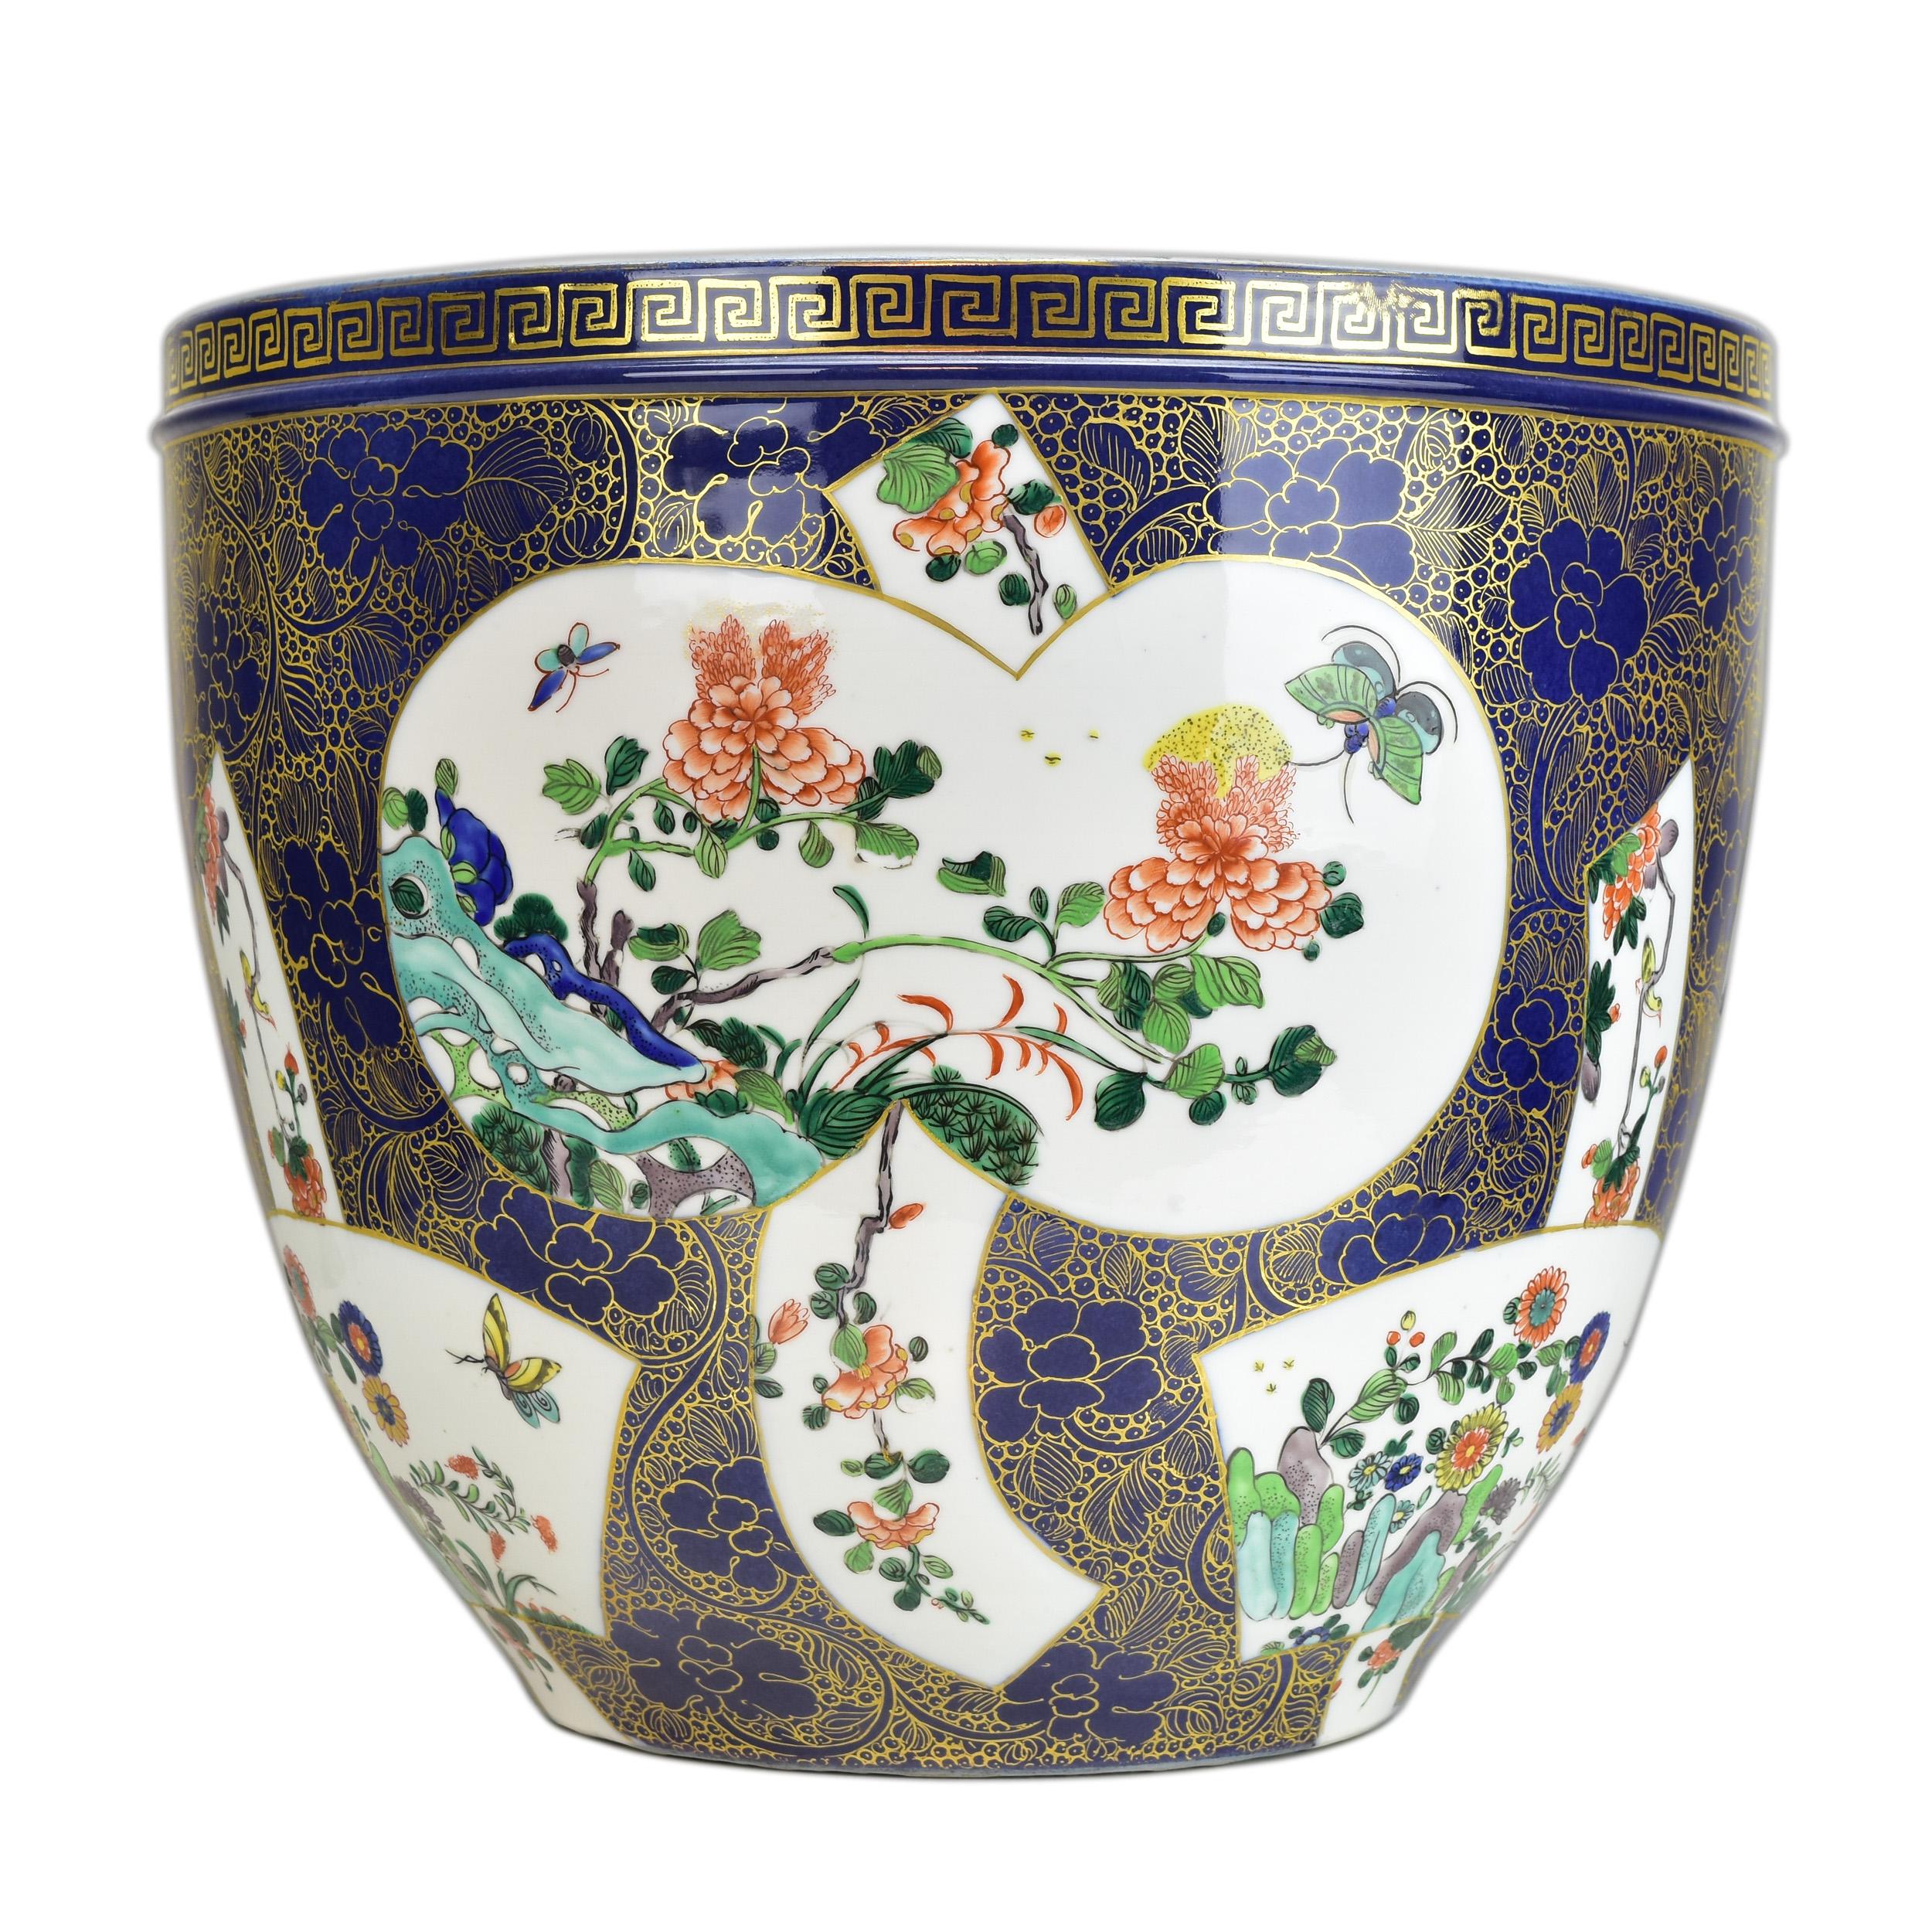 A finely hand-painted large famille rose porcelain planter from the mid-20th century. The planter features intricate hand-painted designs in vibrant colors, typical of the famille rose style. Its sizable dimensions make it a striking decorative